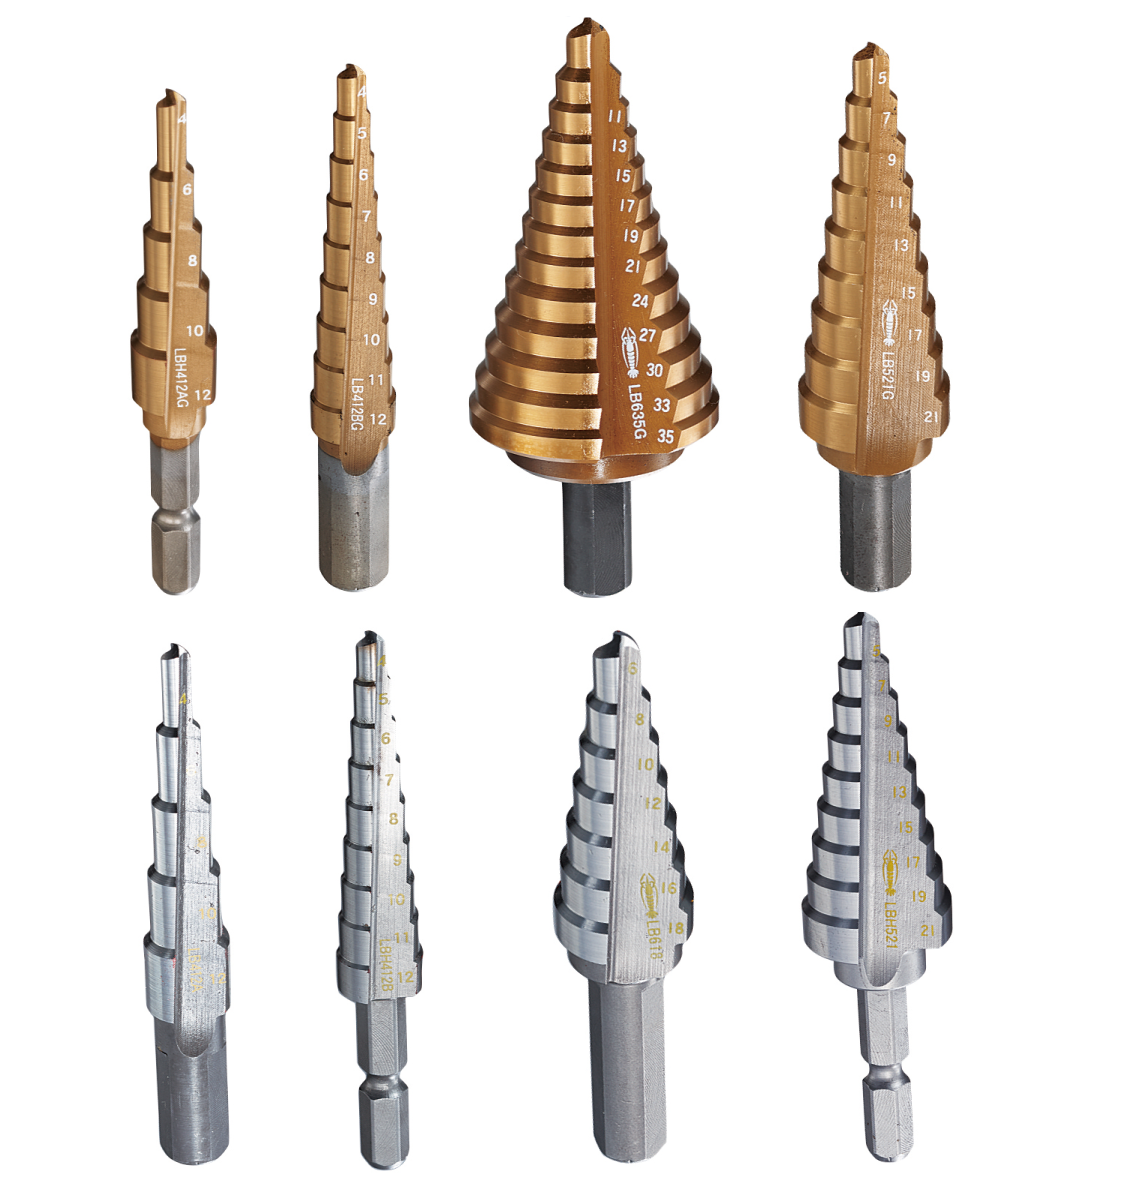 Step drill bit, Stage drill LB (Straight shaft / Hexagon shaft)(Non-coated type / TiN-coated type)